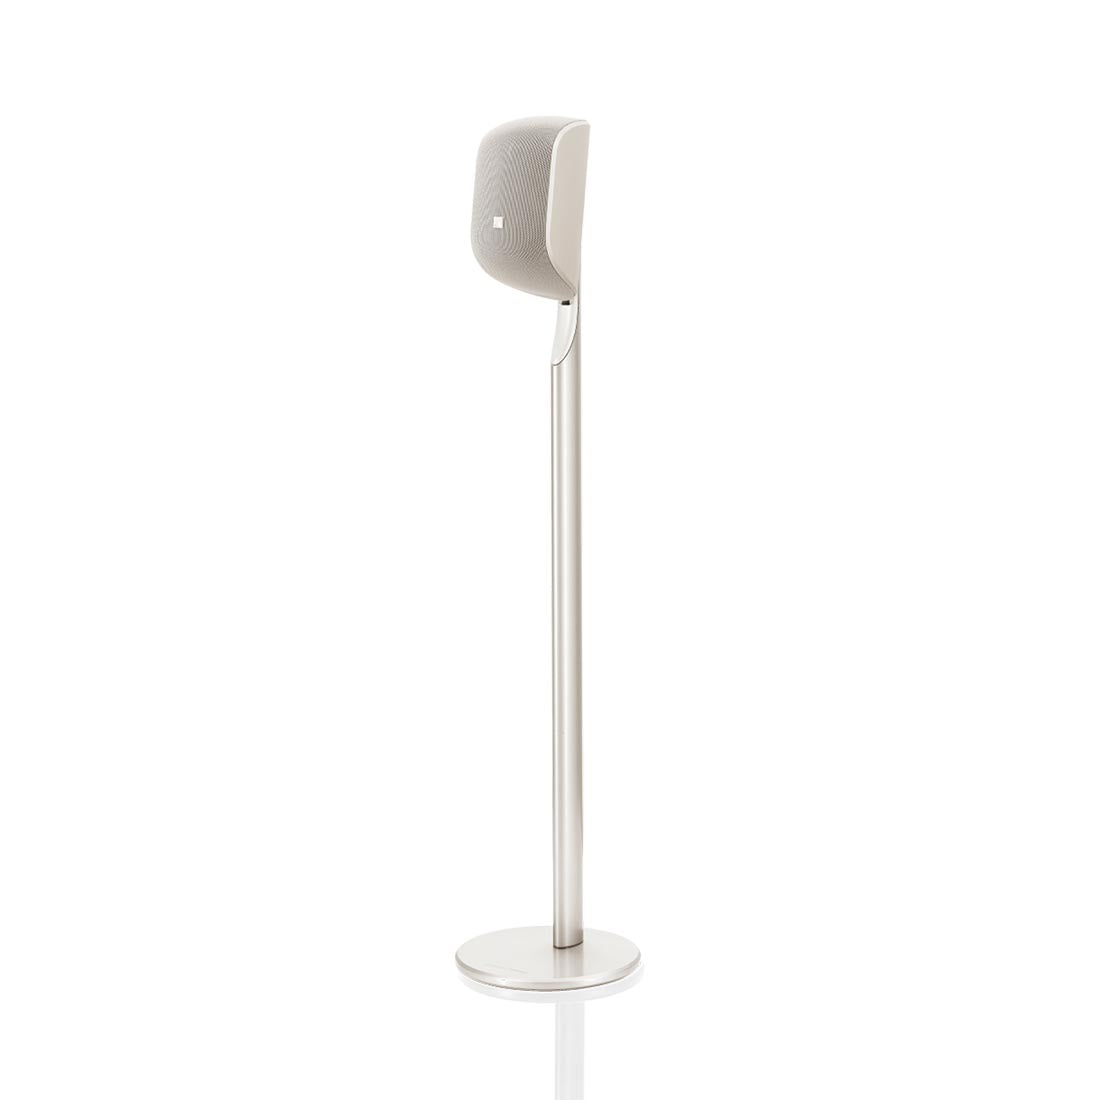 One of Bowers & Wilkins M-1 Speaker Stands, in matte white